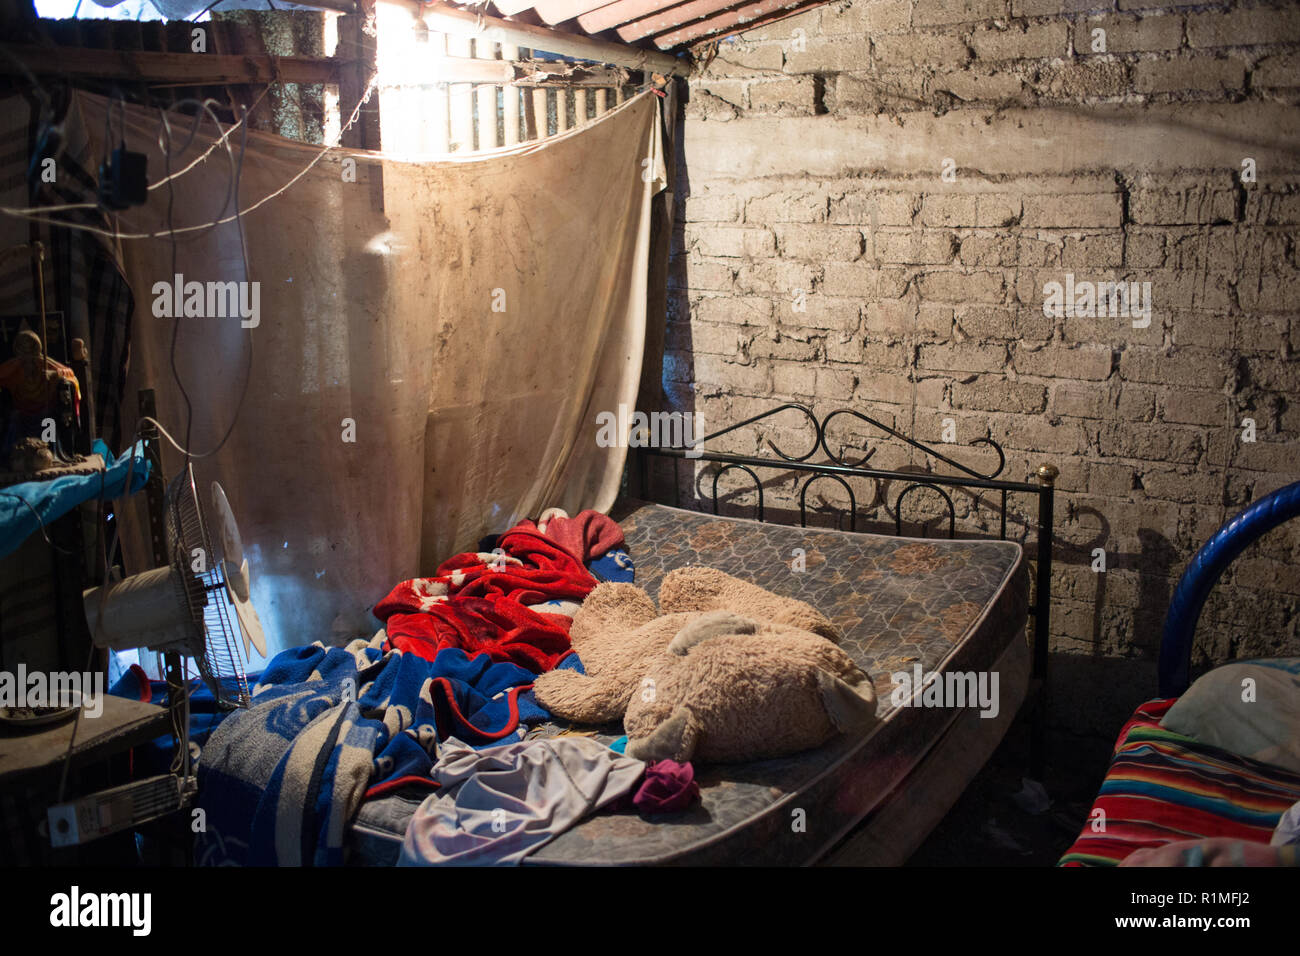 The bedroom of Antonio Ivan Contreras Mata, in Iguala, Guerrero, Mexico, February 6, 2016. Contreras Mata went went missing in Iguala October 3, 2012 from the area. He was 28 years old.   A few days prior to Antonio Ivan's disappearance he received a phone call inviting him to work with an organized crime group. Antonio said that he had three children and did not want to be involved in this life style.  His father  can not be certain, but he thinks this is possibly what created problems for his son. Stock Photo